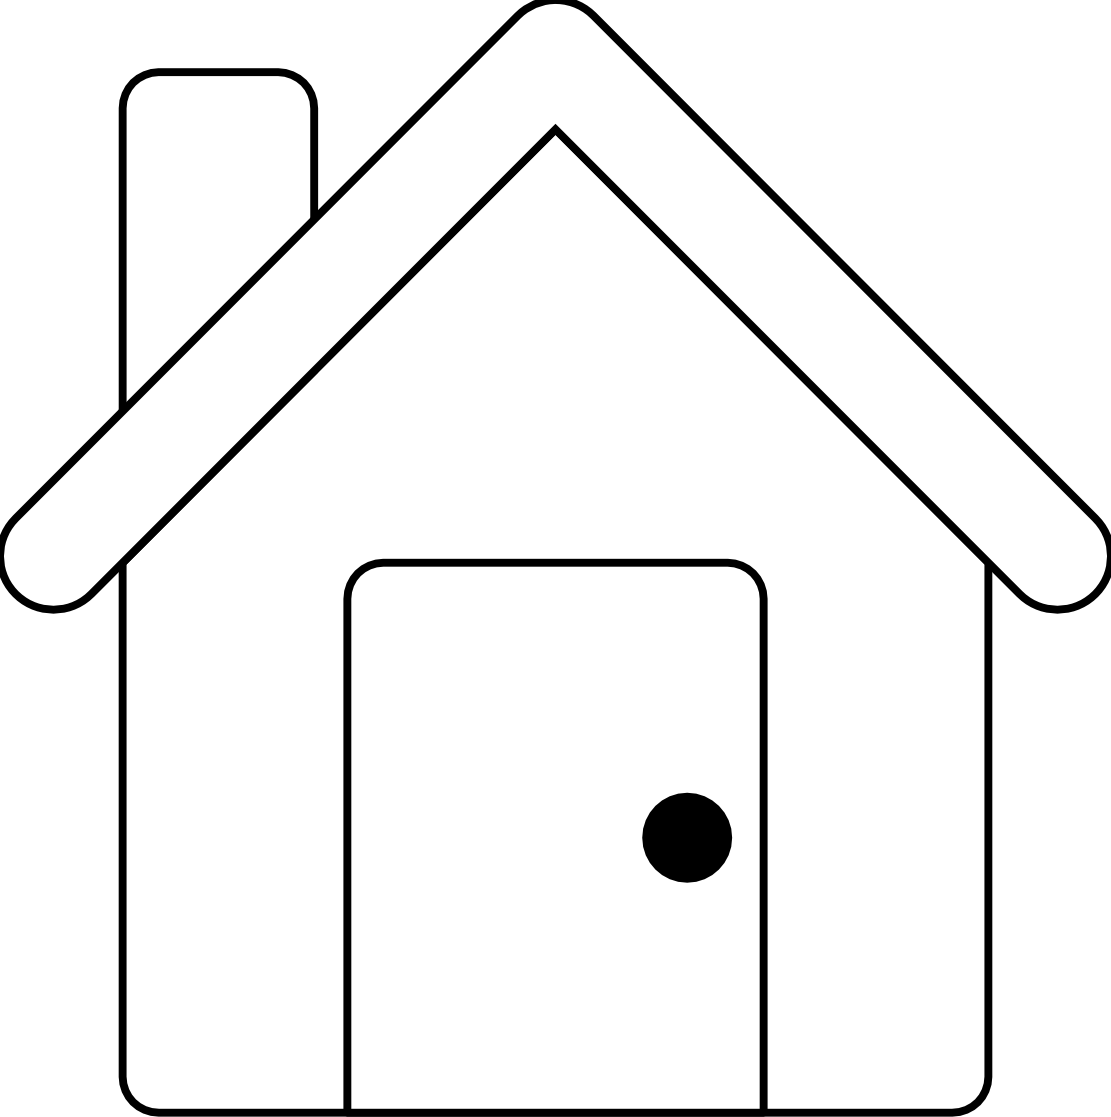 School House Clip Art Black And White - Free ...